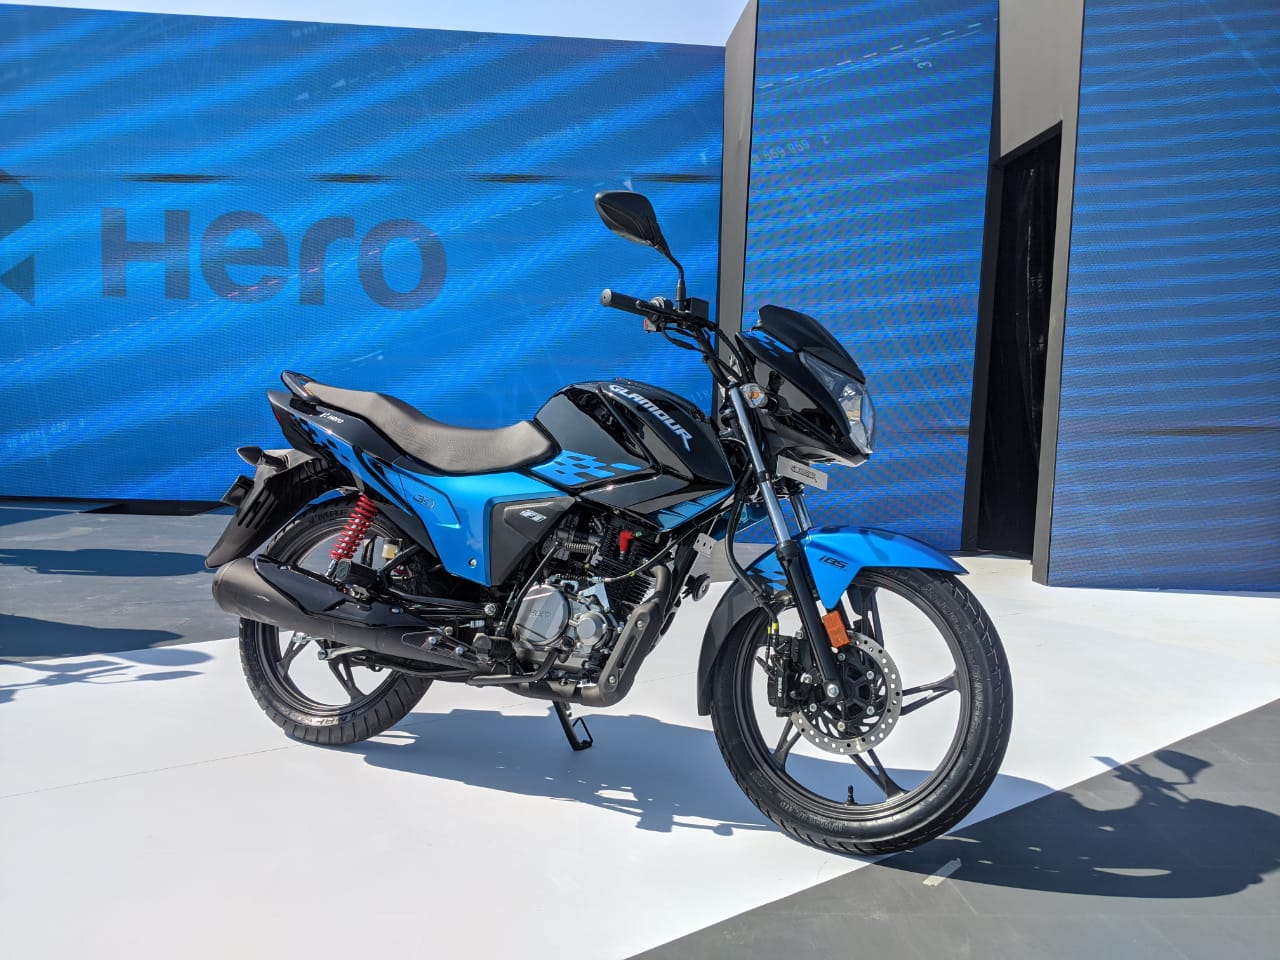 Hero Glamour 125 Bs6 Launched Costs Just Rs 1 450 More Bikedekho